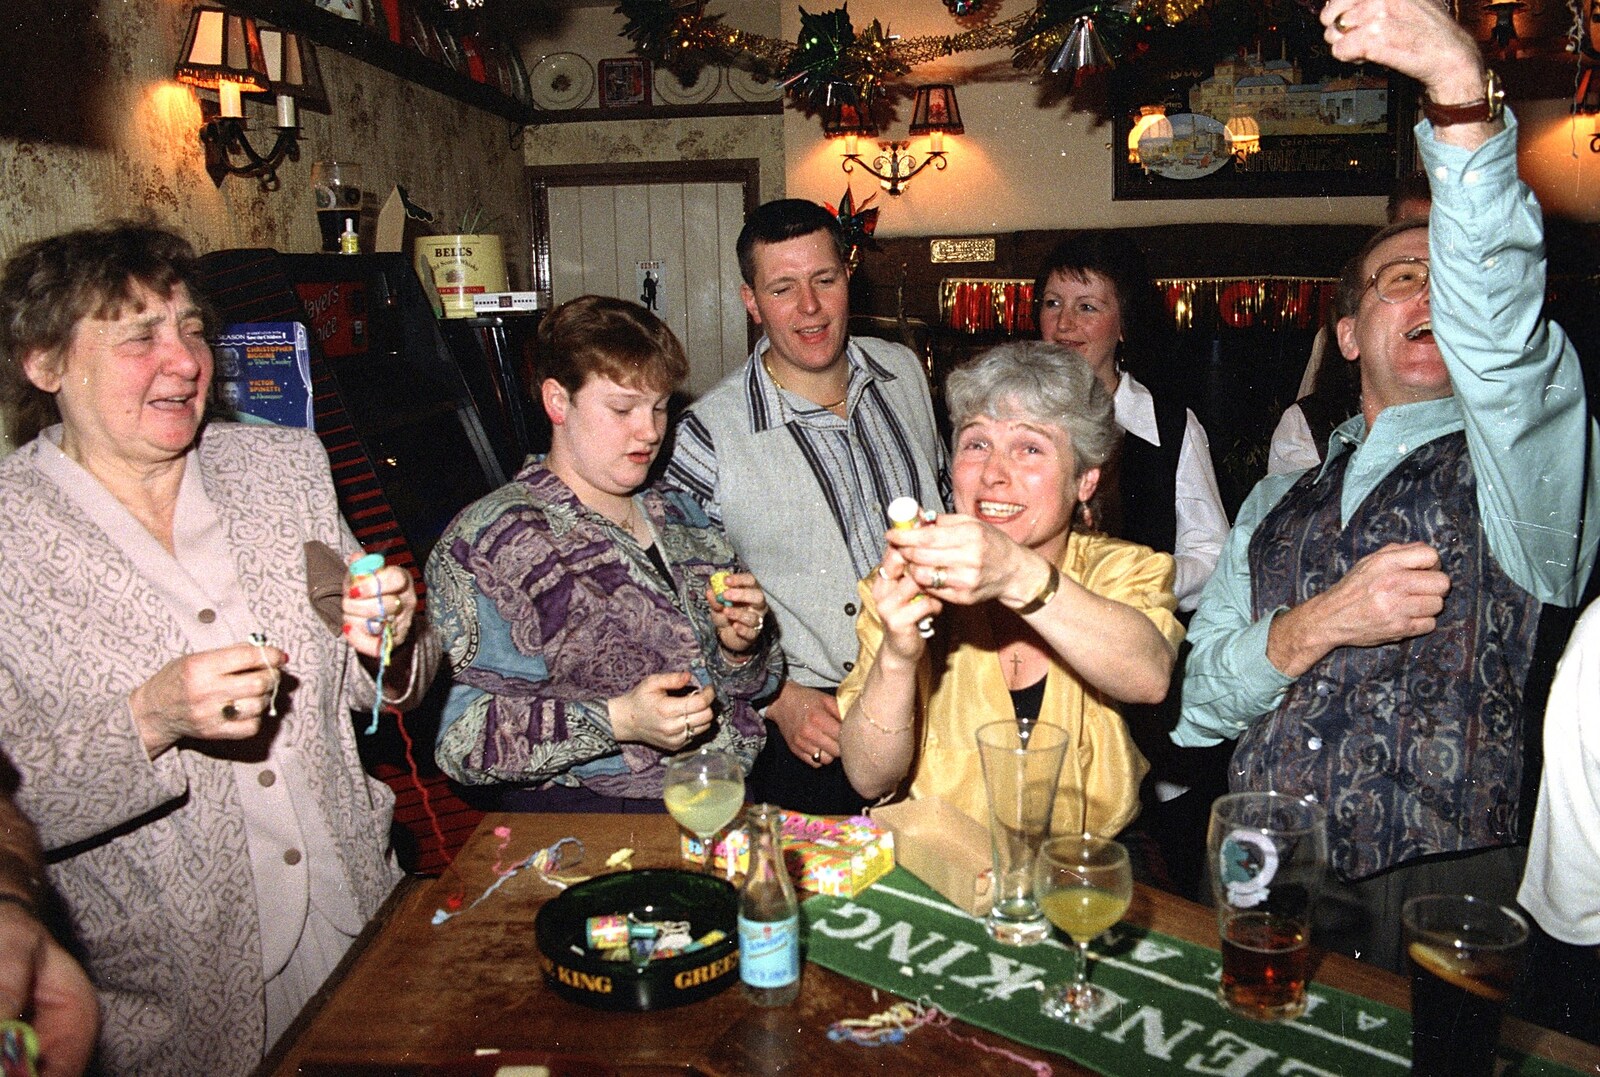 There's a big cheer at midnight from New Year's Eve at the Swan Inn, Brome, Suffolk - 31st December 1994